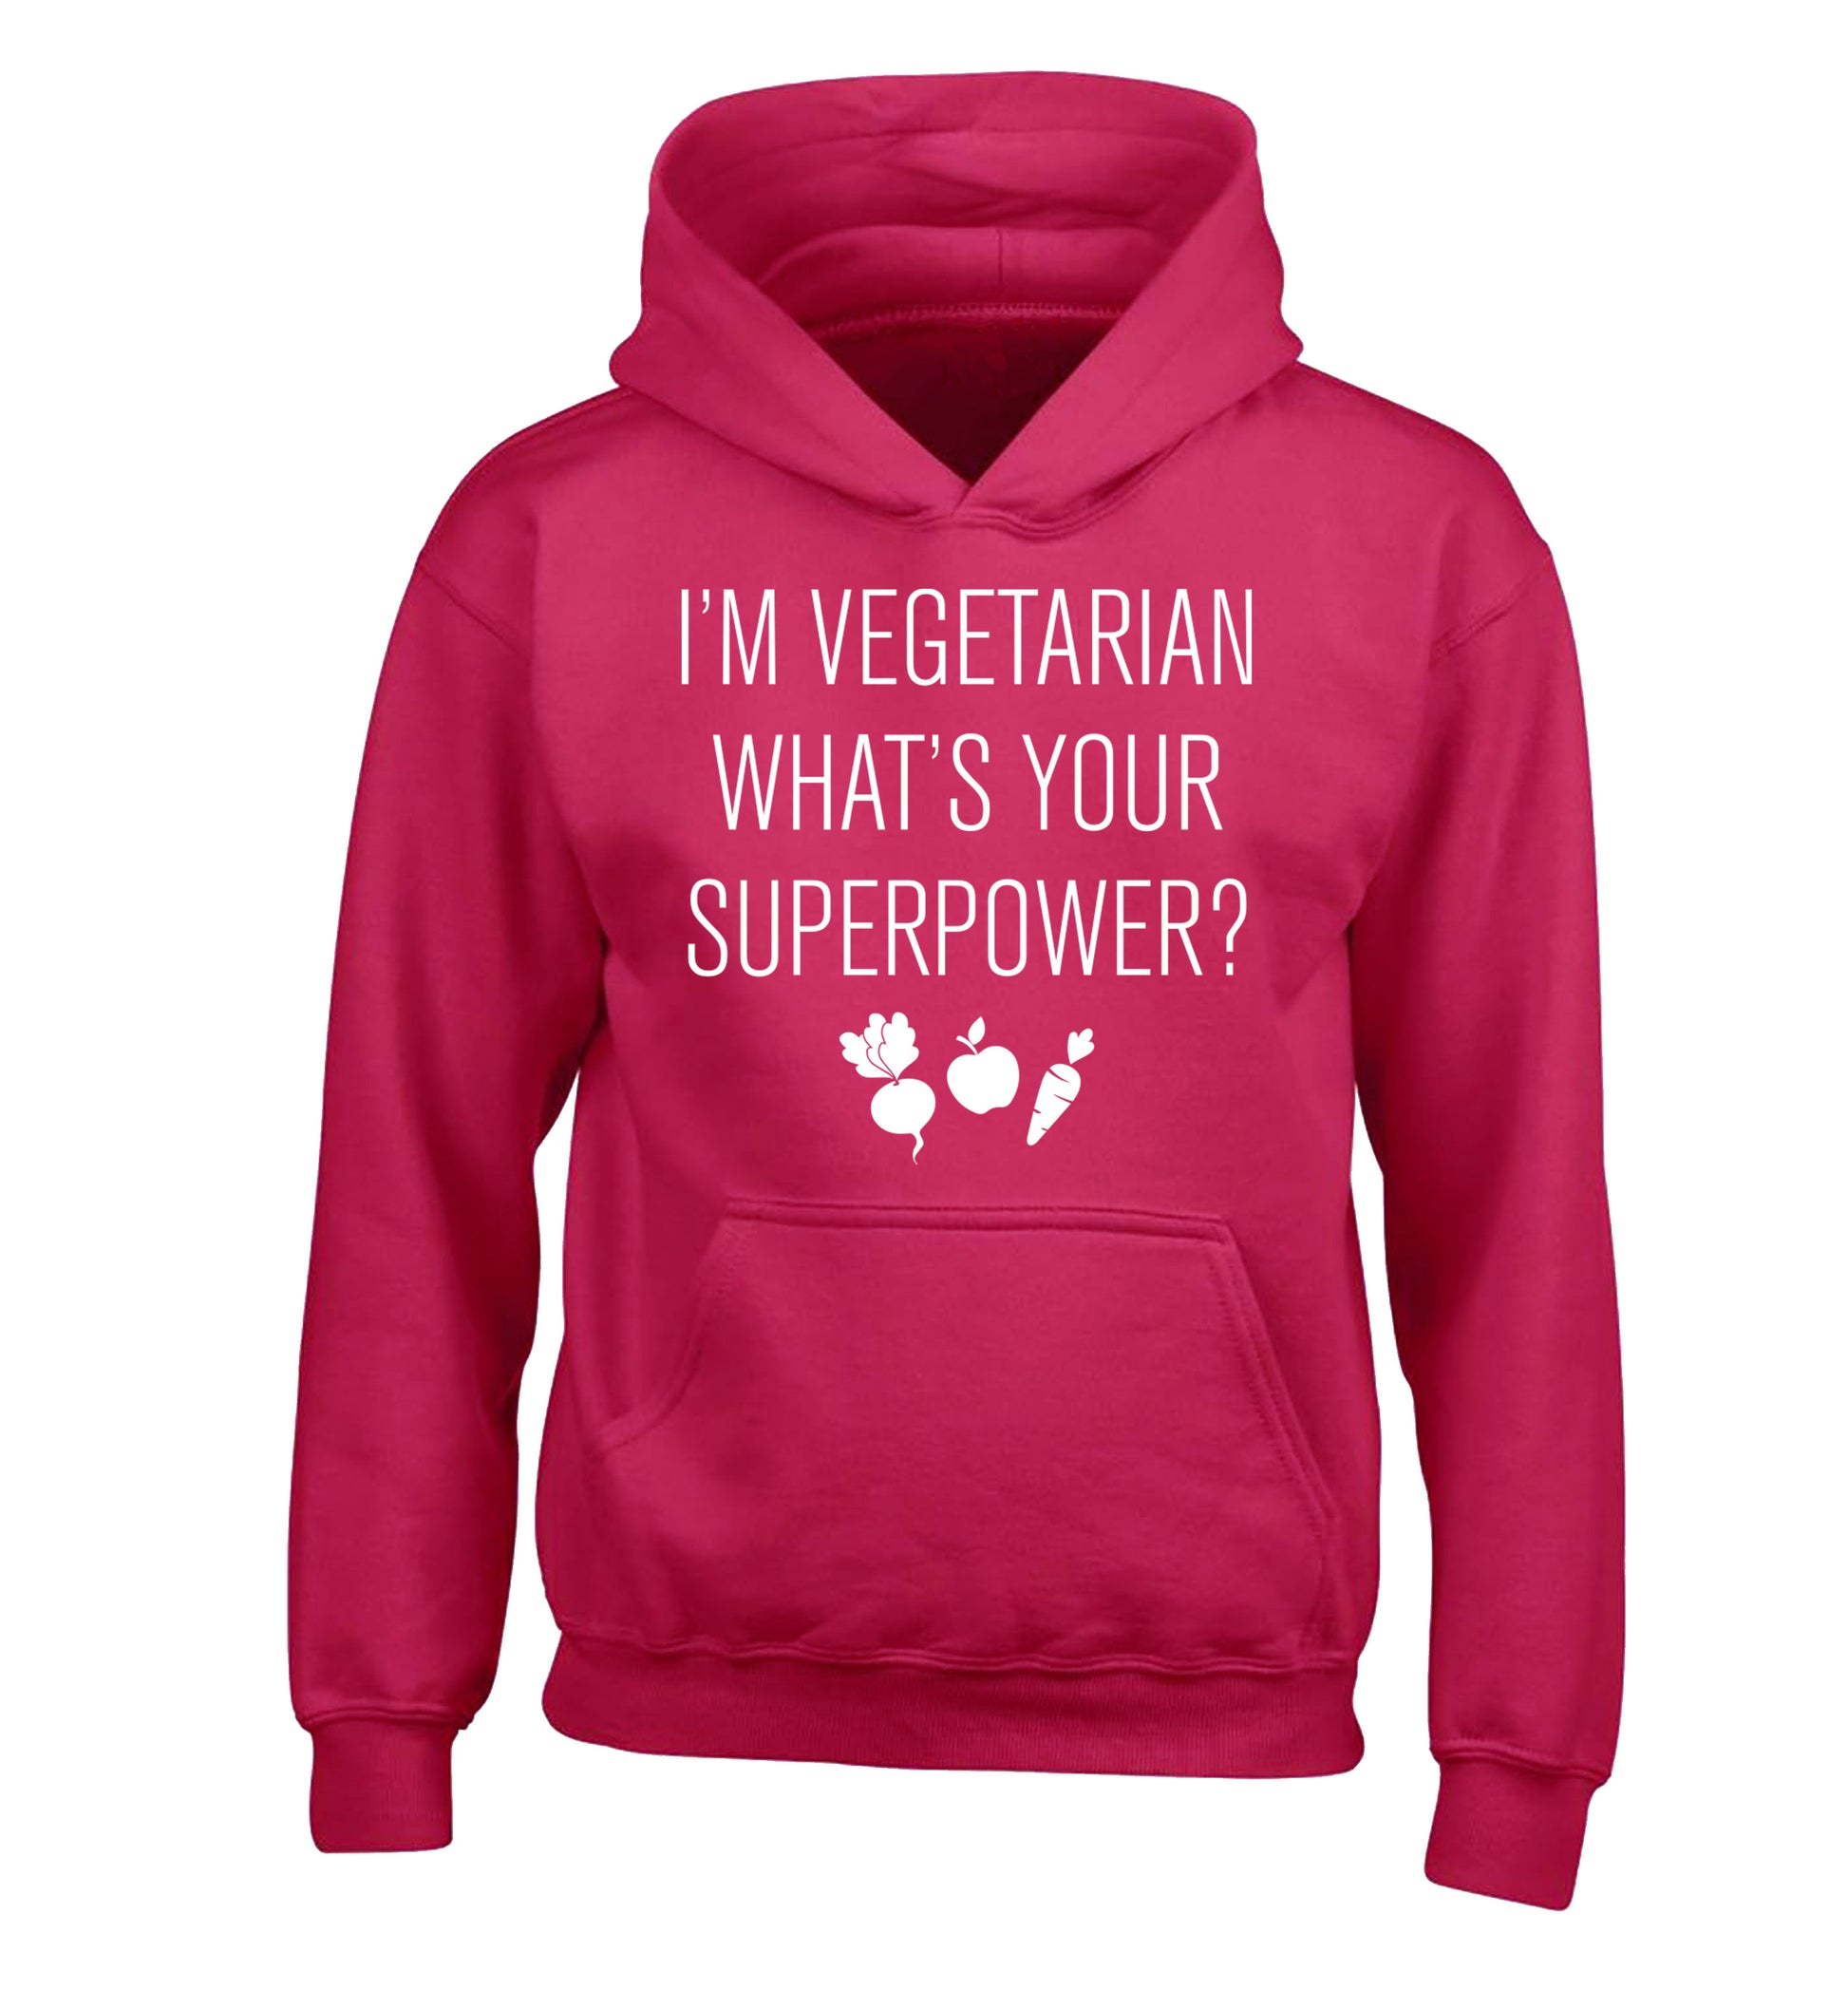 I'm vegetarian what's your superpower? children's pink hoodie 12-13 Years